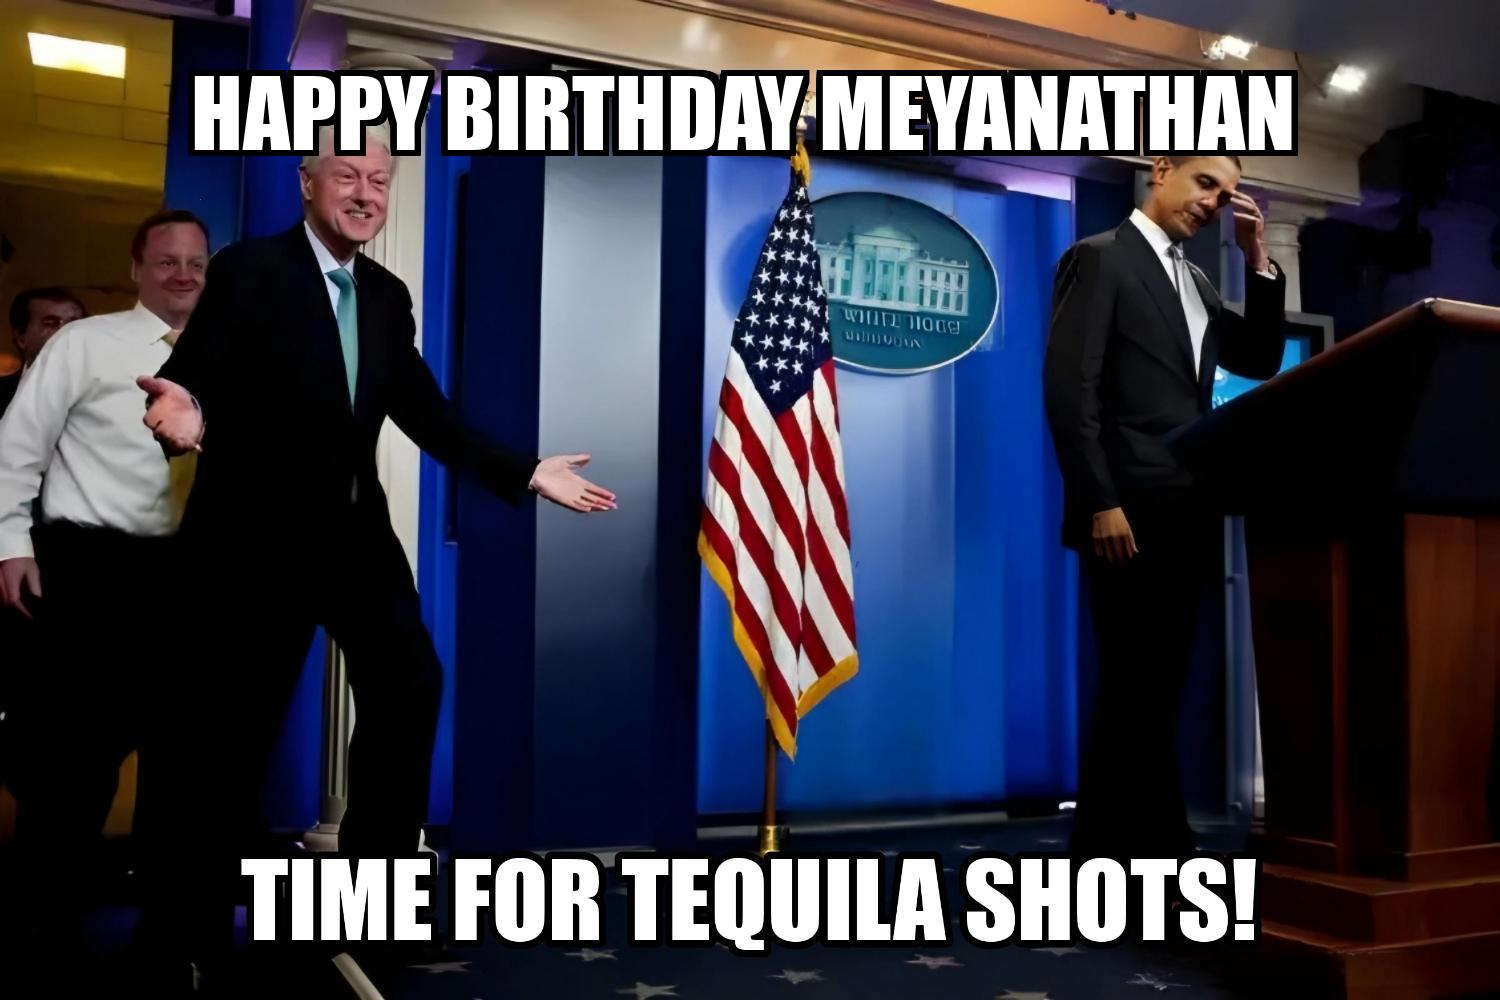 Happy Birthday Meyanathan Time For Tequila Shots Memes